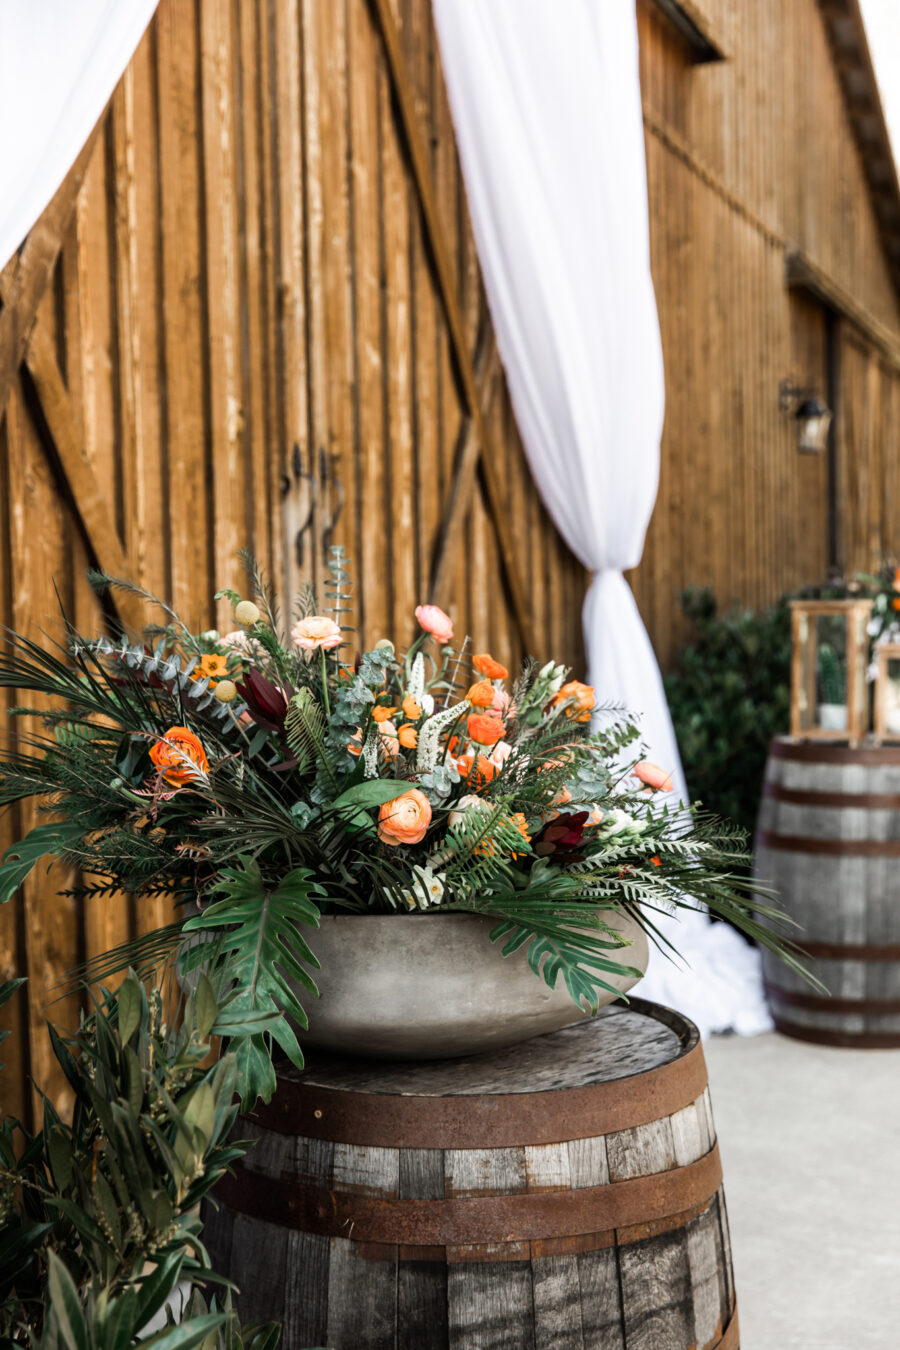 Barrel Wedding Ceremony Decor: Western Inspired Wedding by Laurie D'Anne Events featured on Nashville Bride Guide